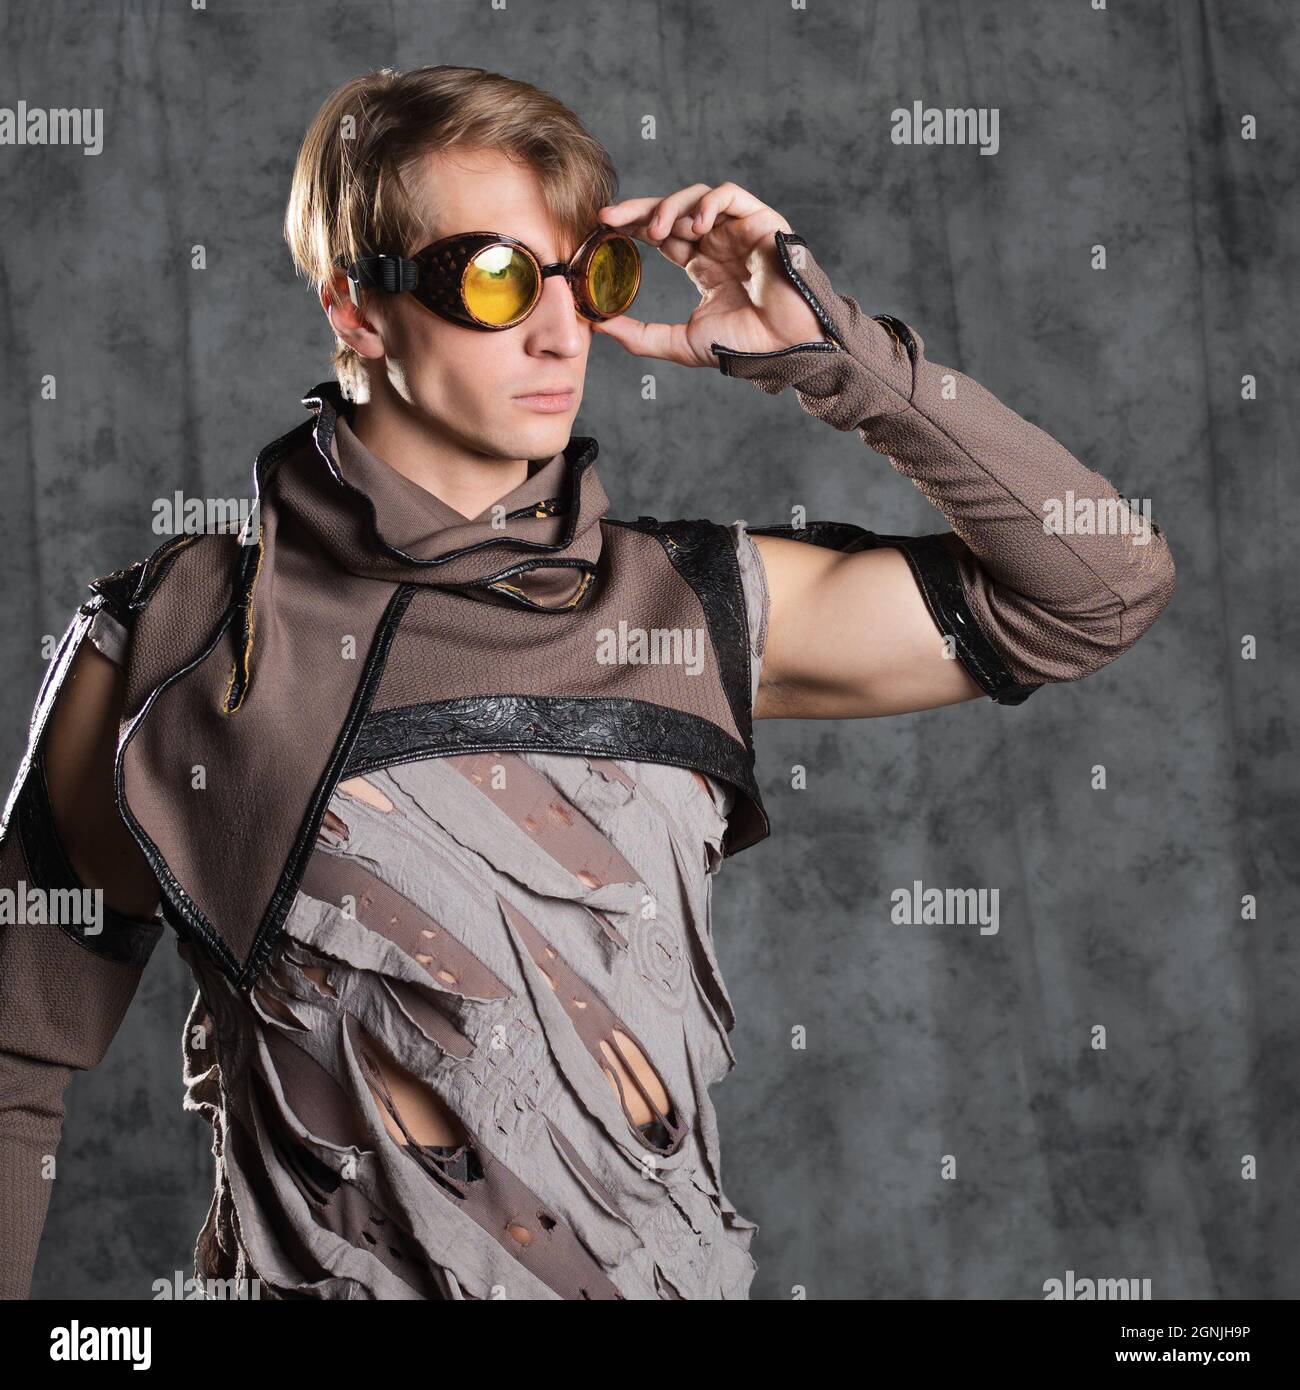 Steampunk or post-apocalyptic style character, a young man in a grunge suit. A jacket with fastened sleeves with slits m goggle flight glasses on his Stock Photo